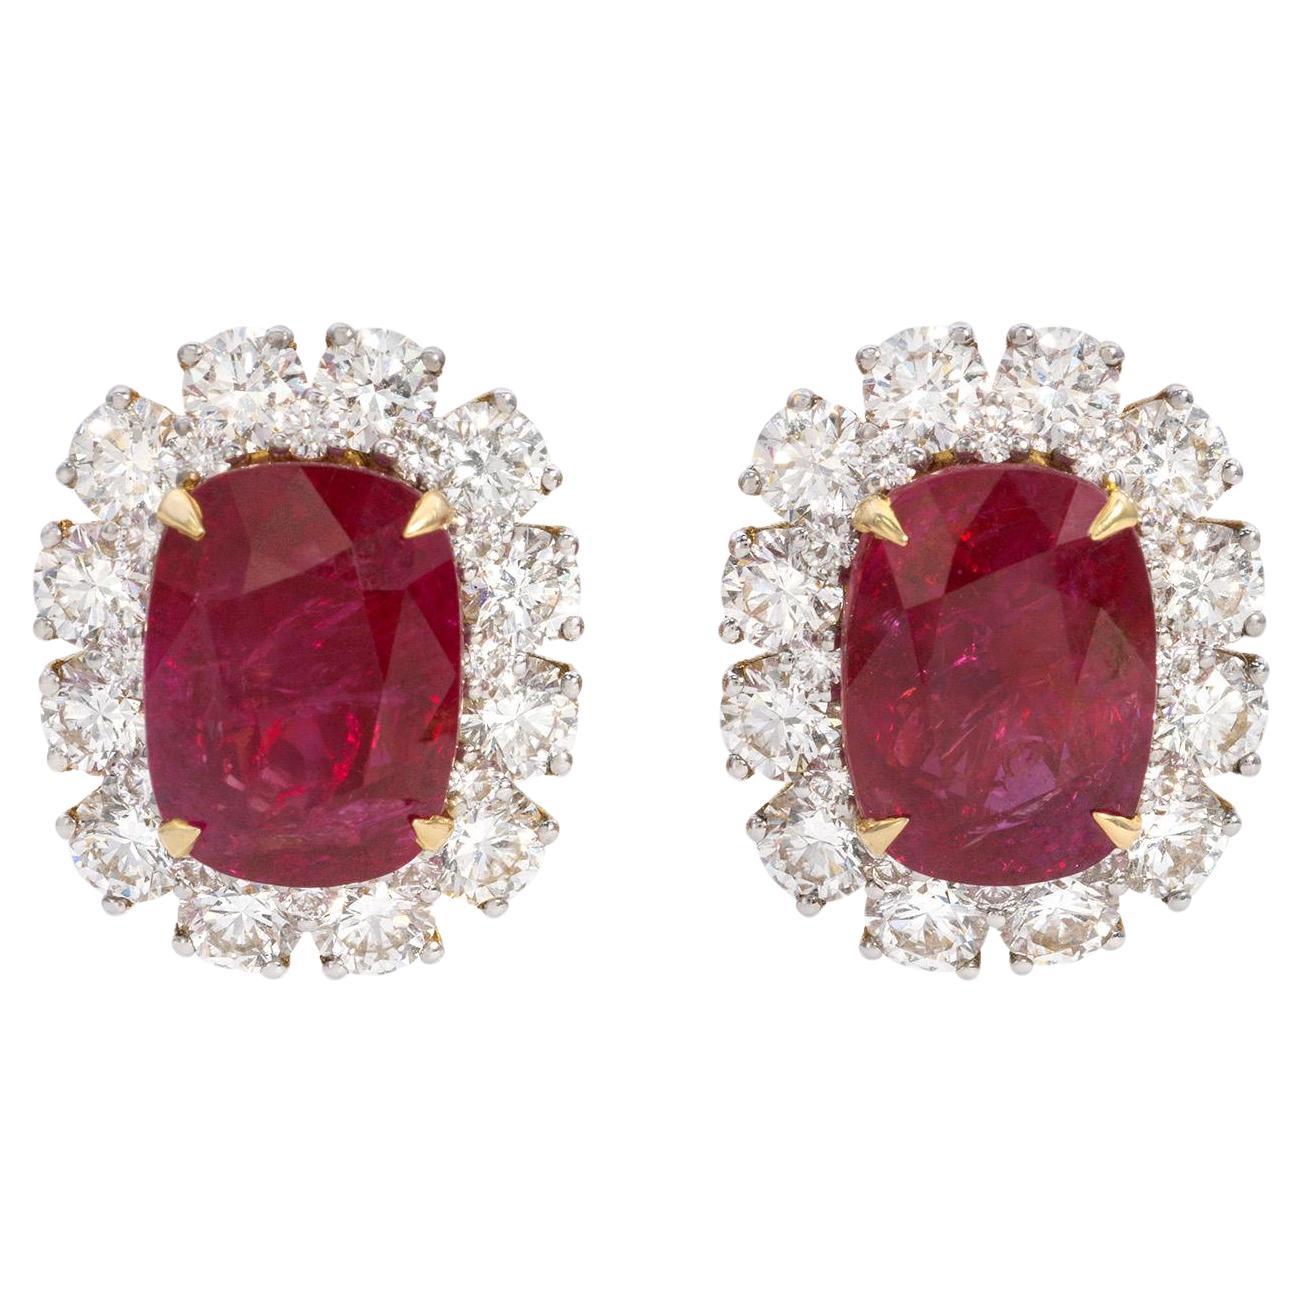 Certified 11 Carat Natural Burmese Ruby and Diamond 18K Gold Earrings For Sale